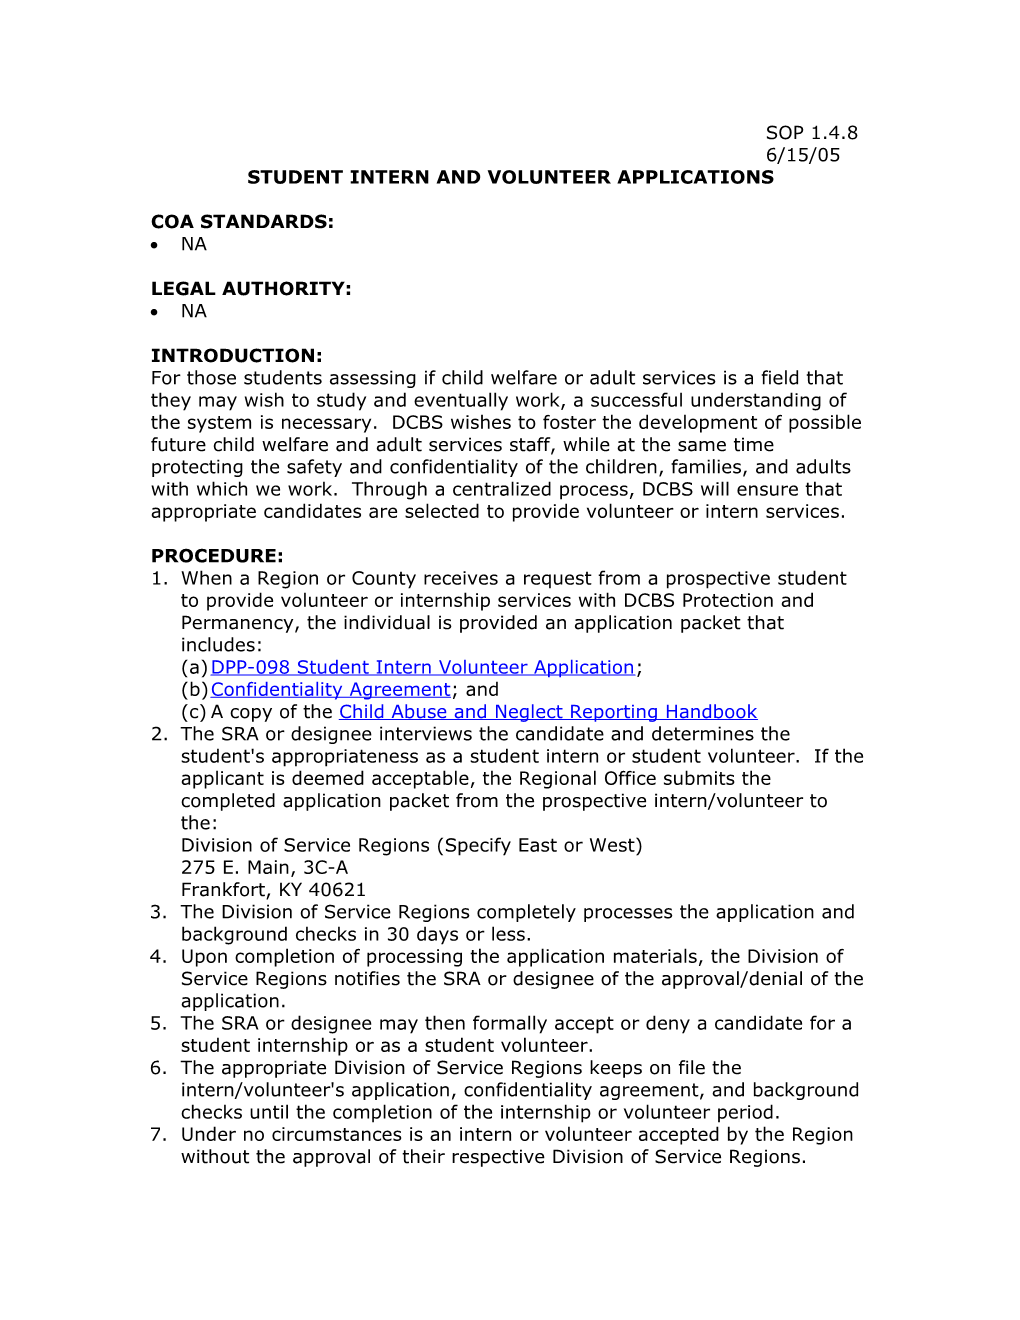 Student Intern and Volunteer Applications